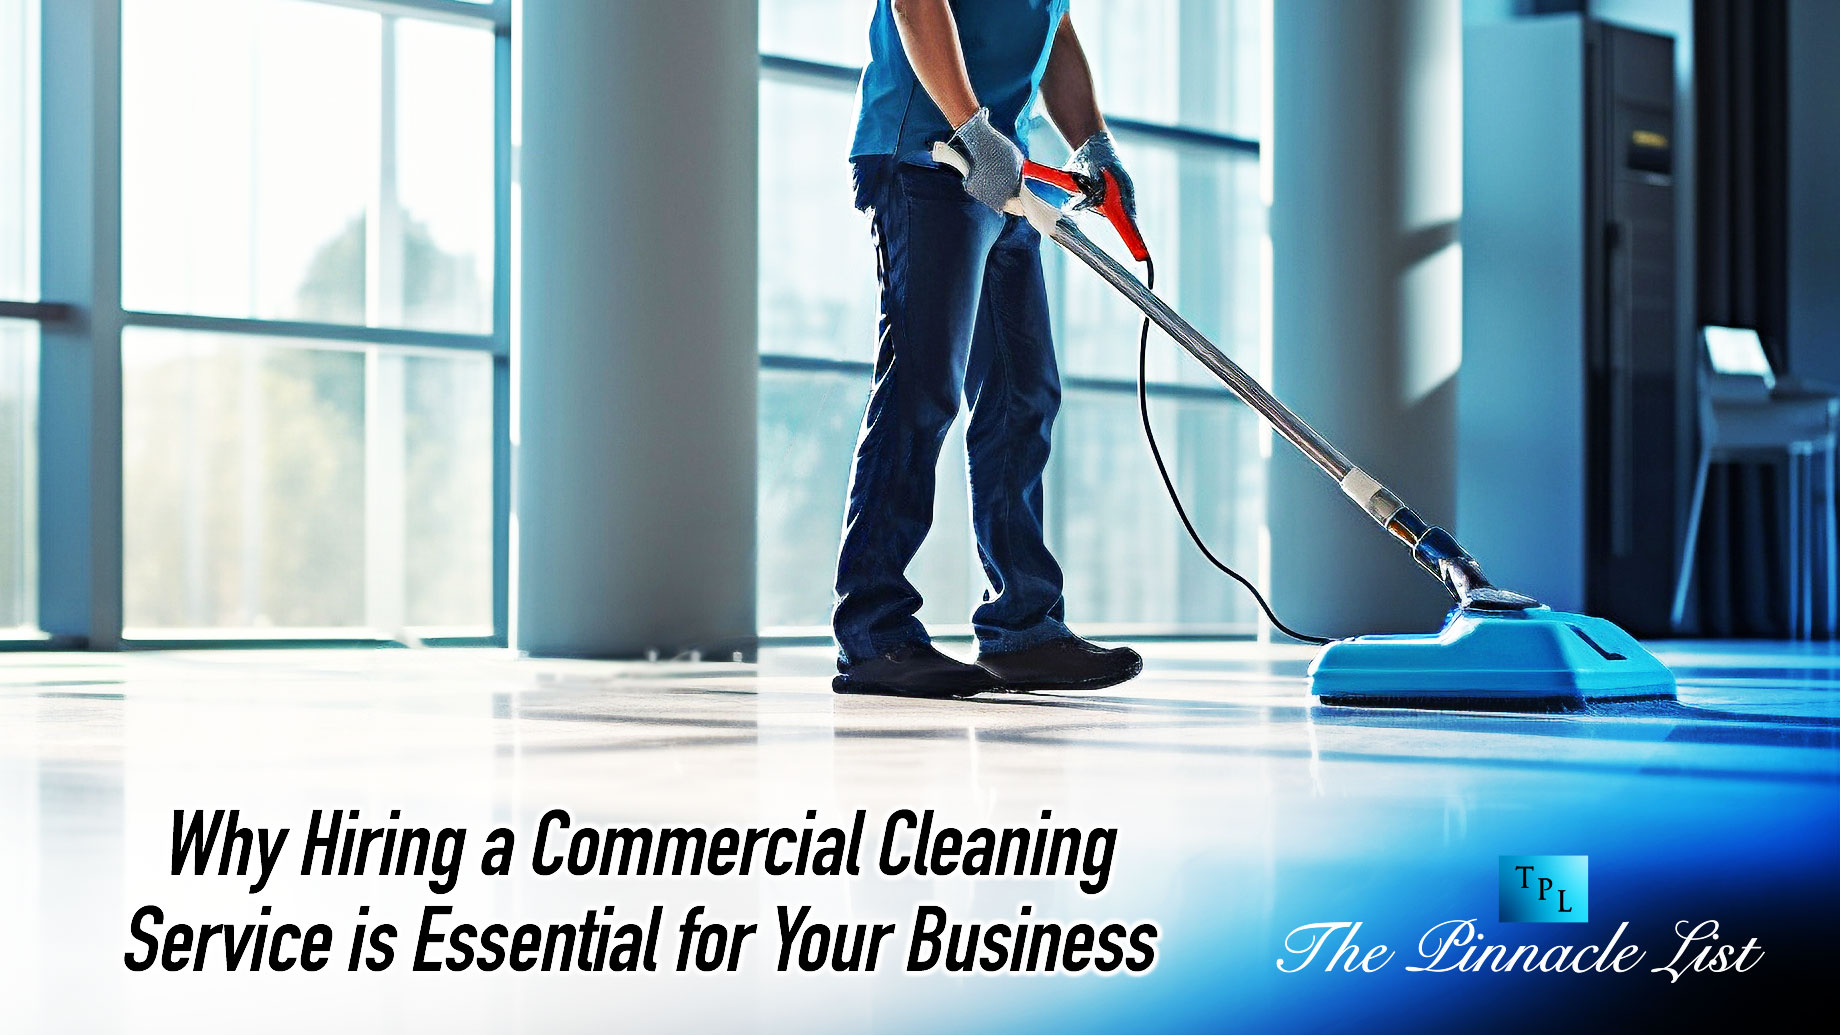 Why Hiring a Commercial Cleaning Service is Essential for Your Business